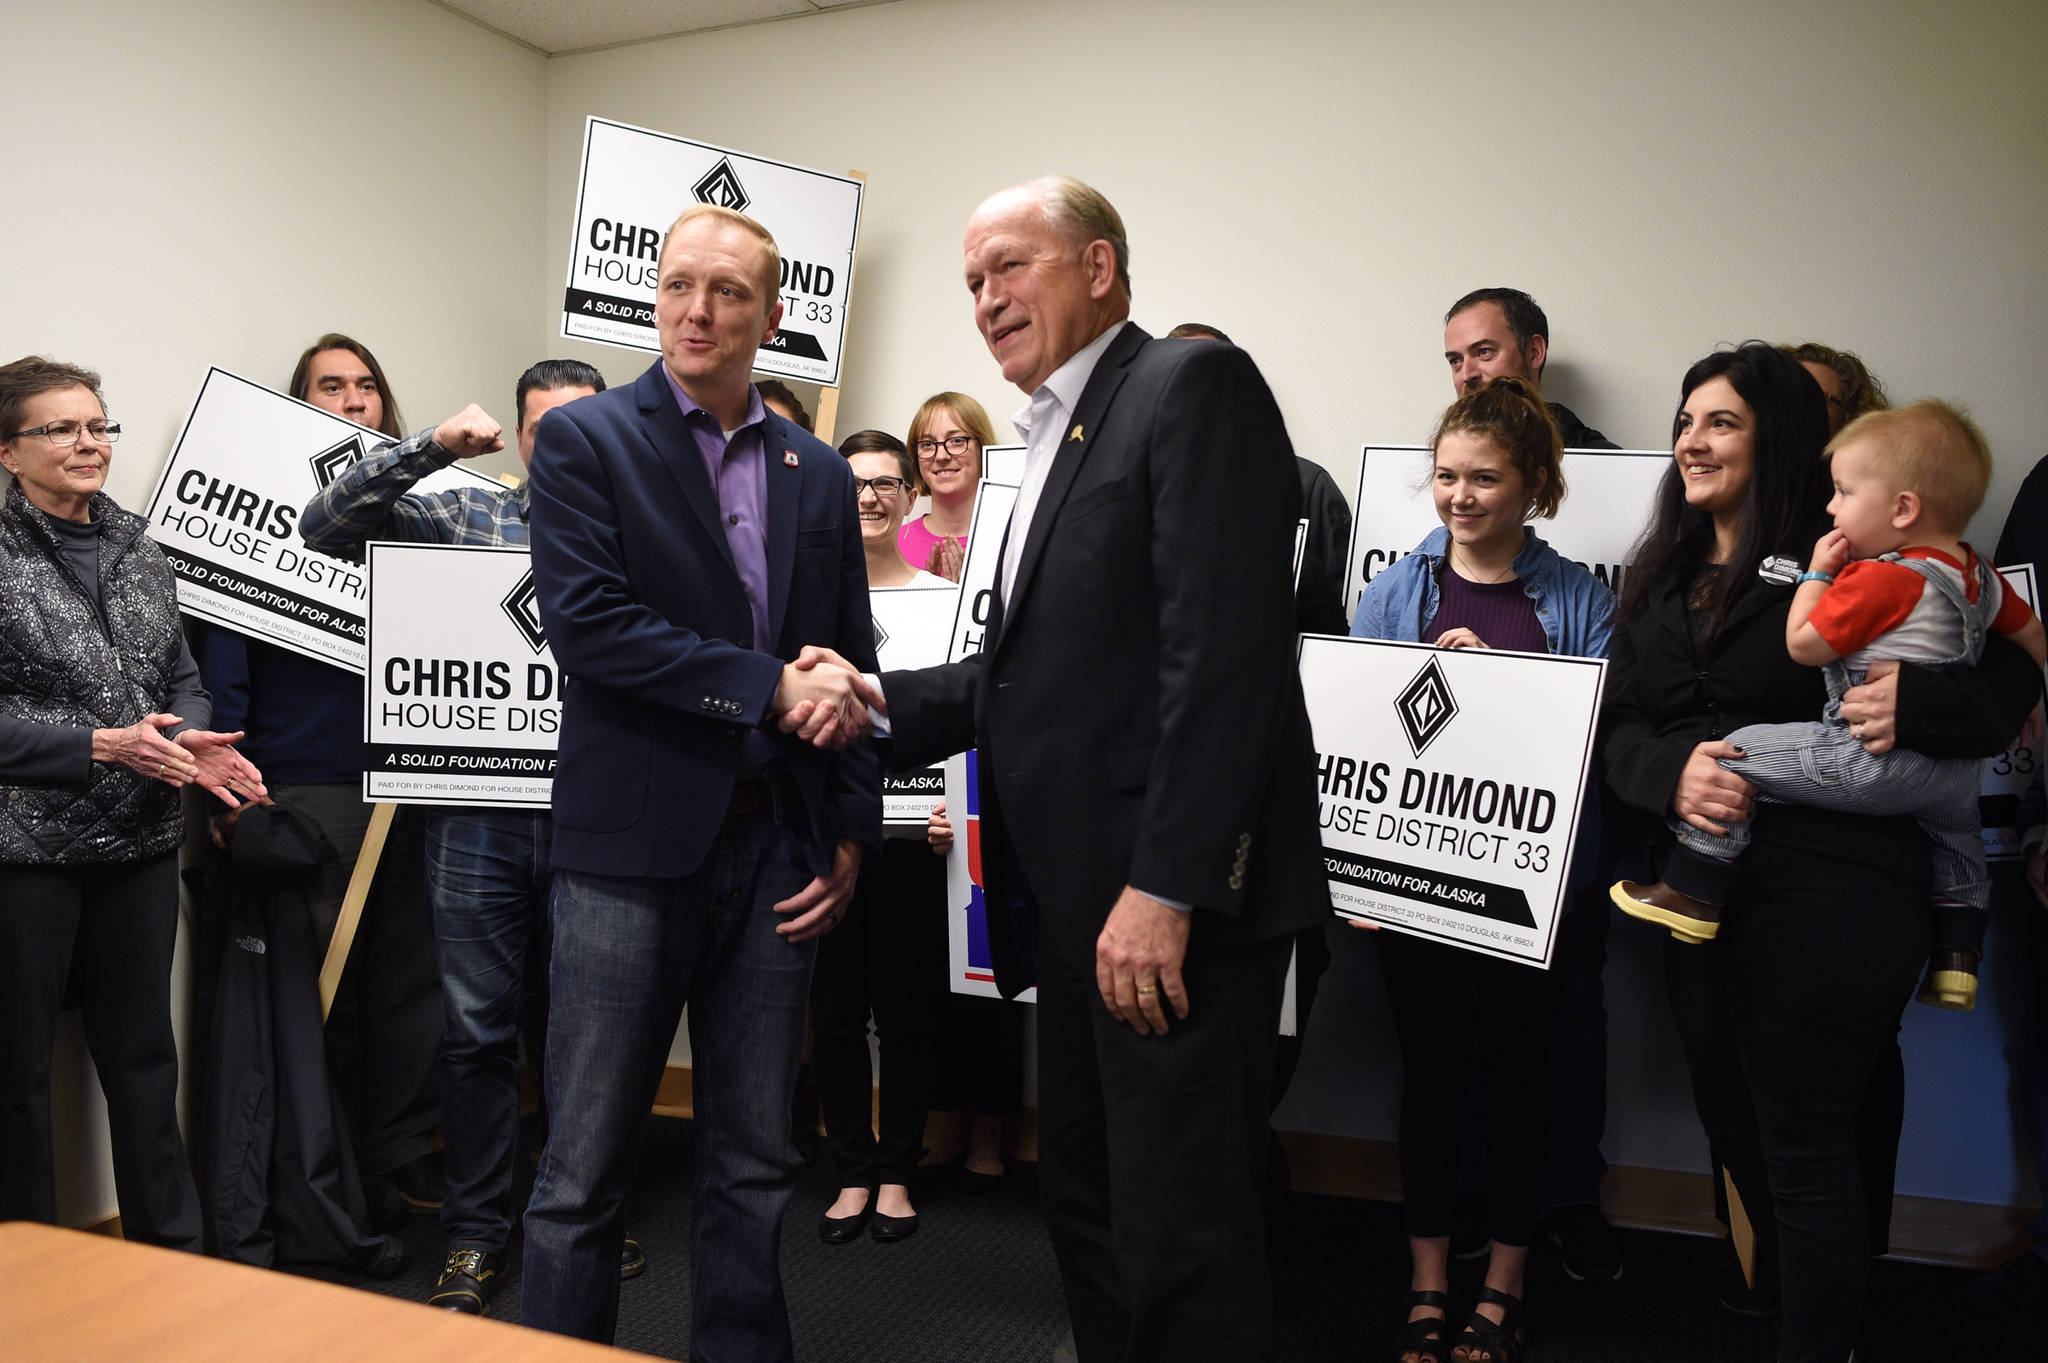 Gov. Bill Walker meets with House District 33 independent candidate Chris Dimond and his supporters at the IBEW union hall to give his endorsement to Dimond on Tuesday, Oct. 30, 2018. (Michael Penn | Juneau Empire)